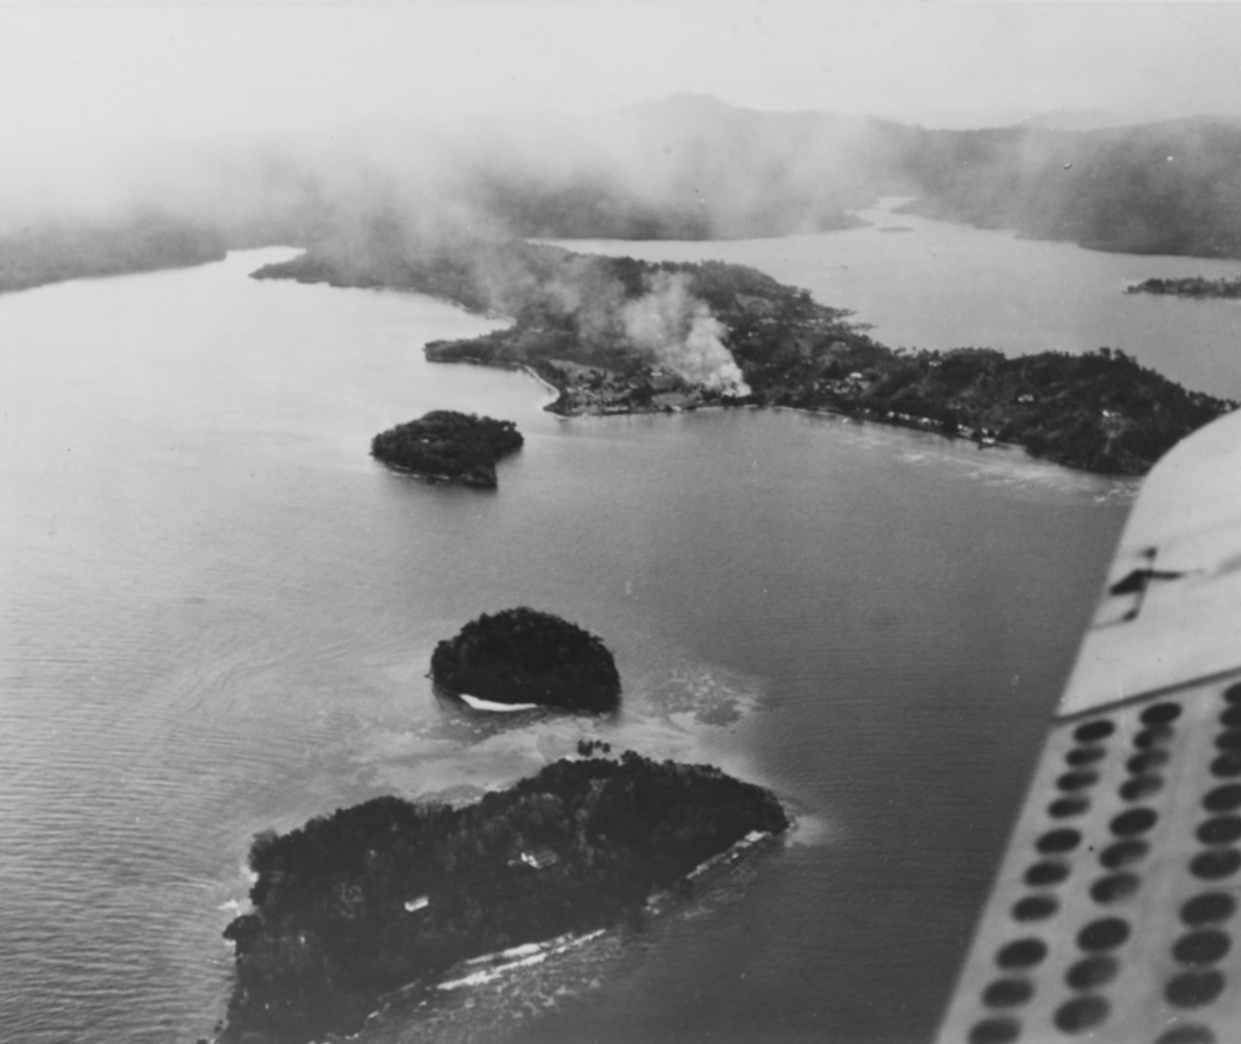 Photo #: NH 97742 Guadalcanal-Tulagi Operation, August 1942